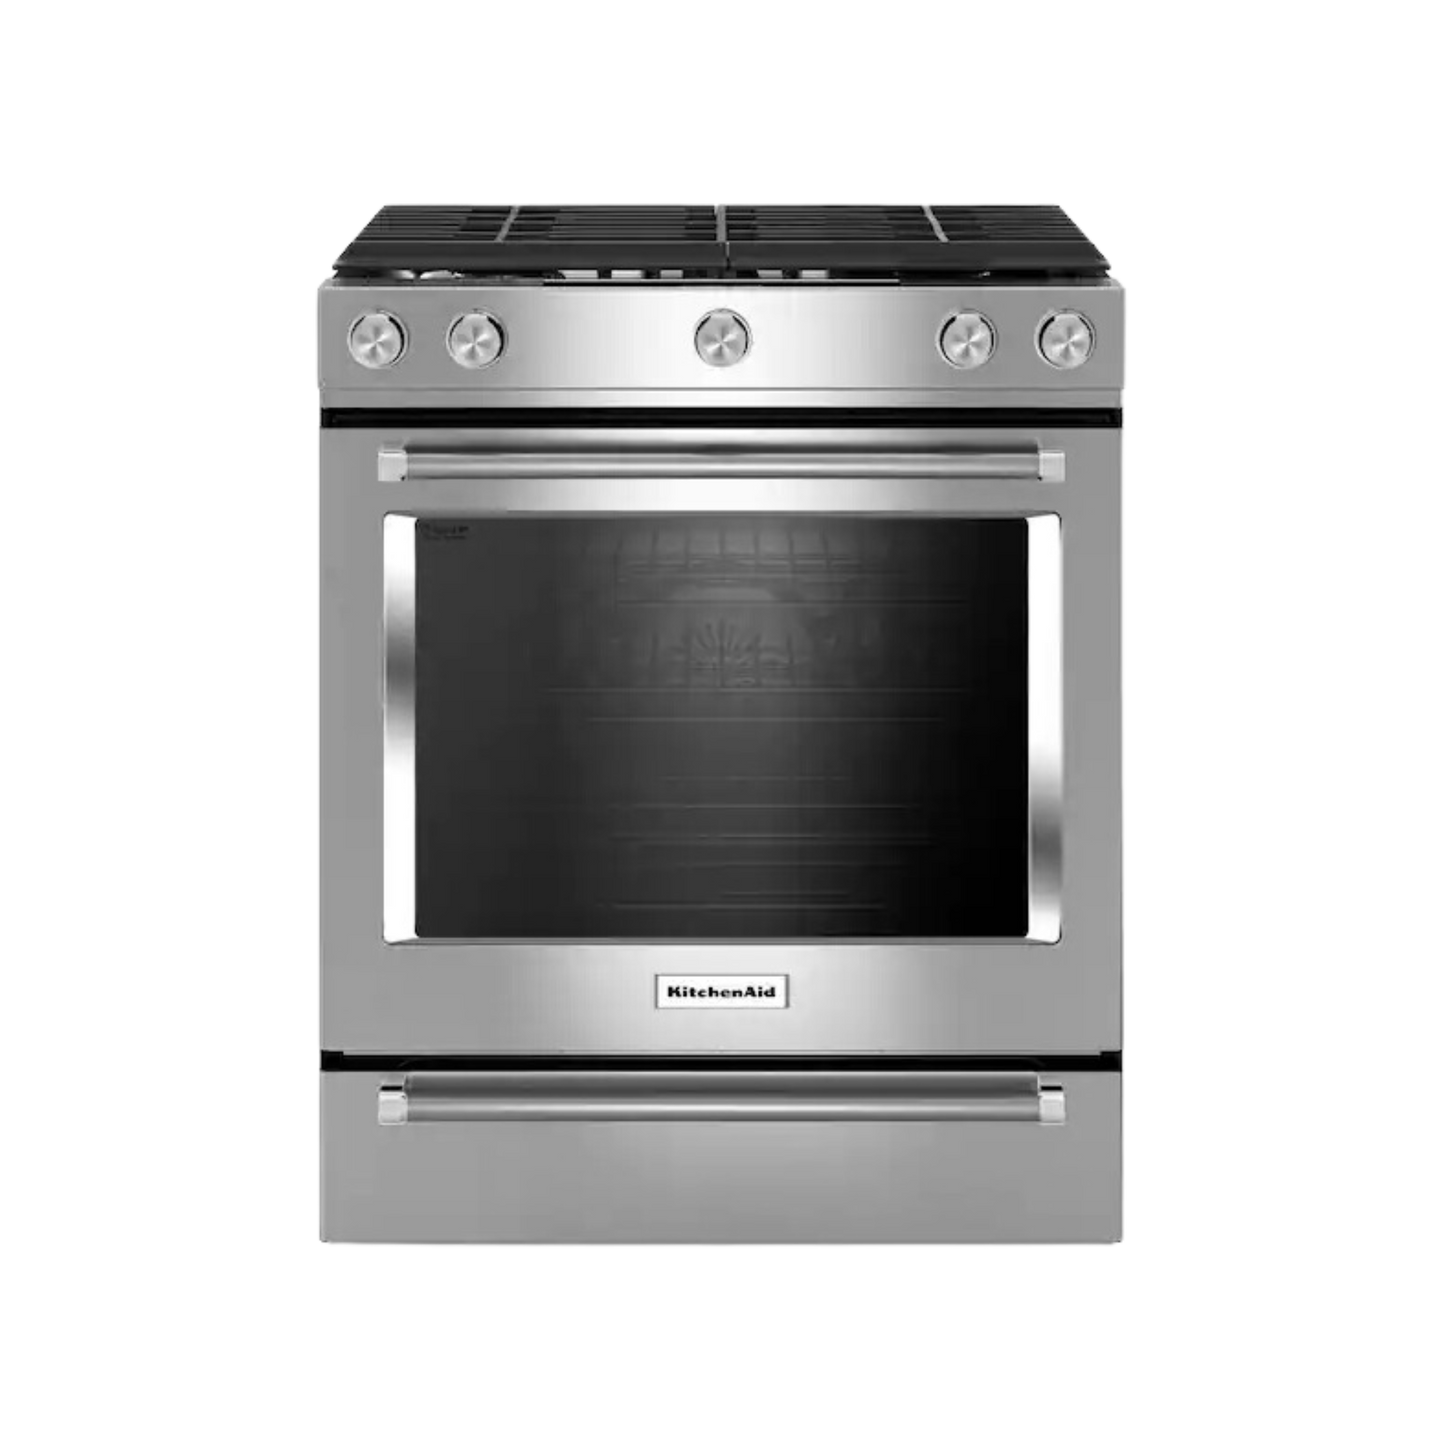 KitchenAid 5.8 cu. ft. Slide-In Gas Range with Self-Cleaning Convection Oven in Stainless Steel KSGG700ESS